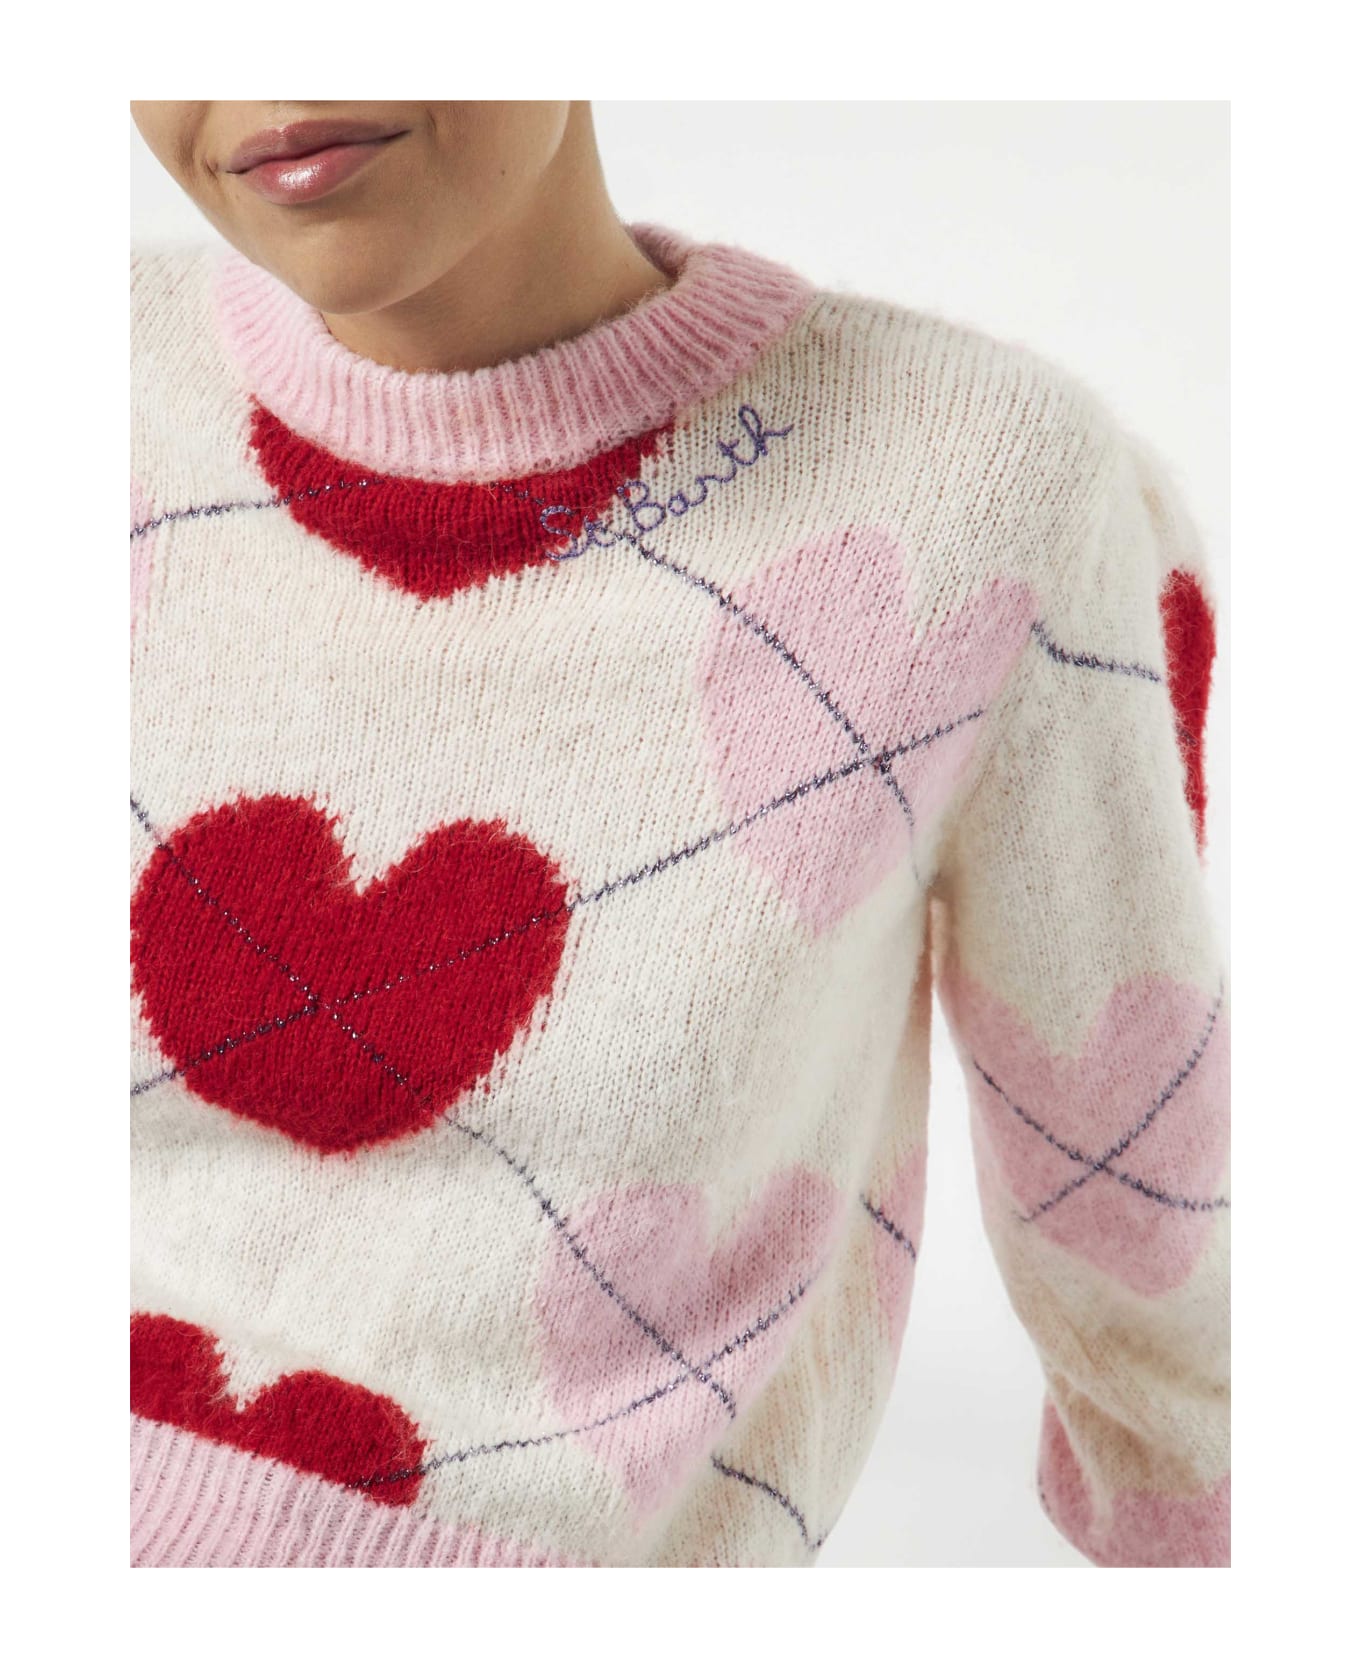 MC2 Saint Barth Woman Brushed Striped Sweater With Heart Pattern - MULTICOLOR